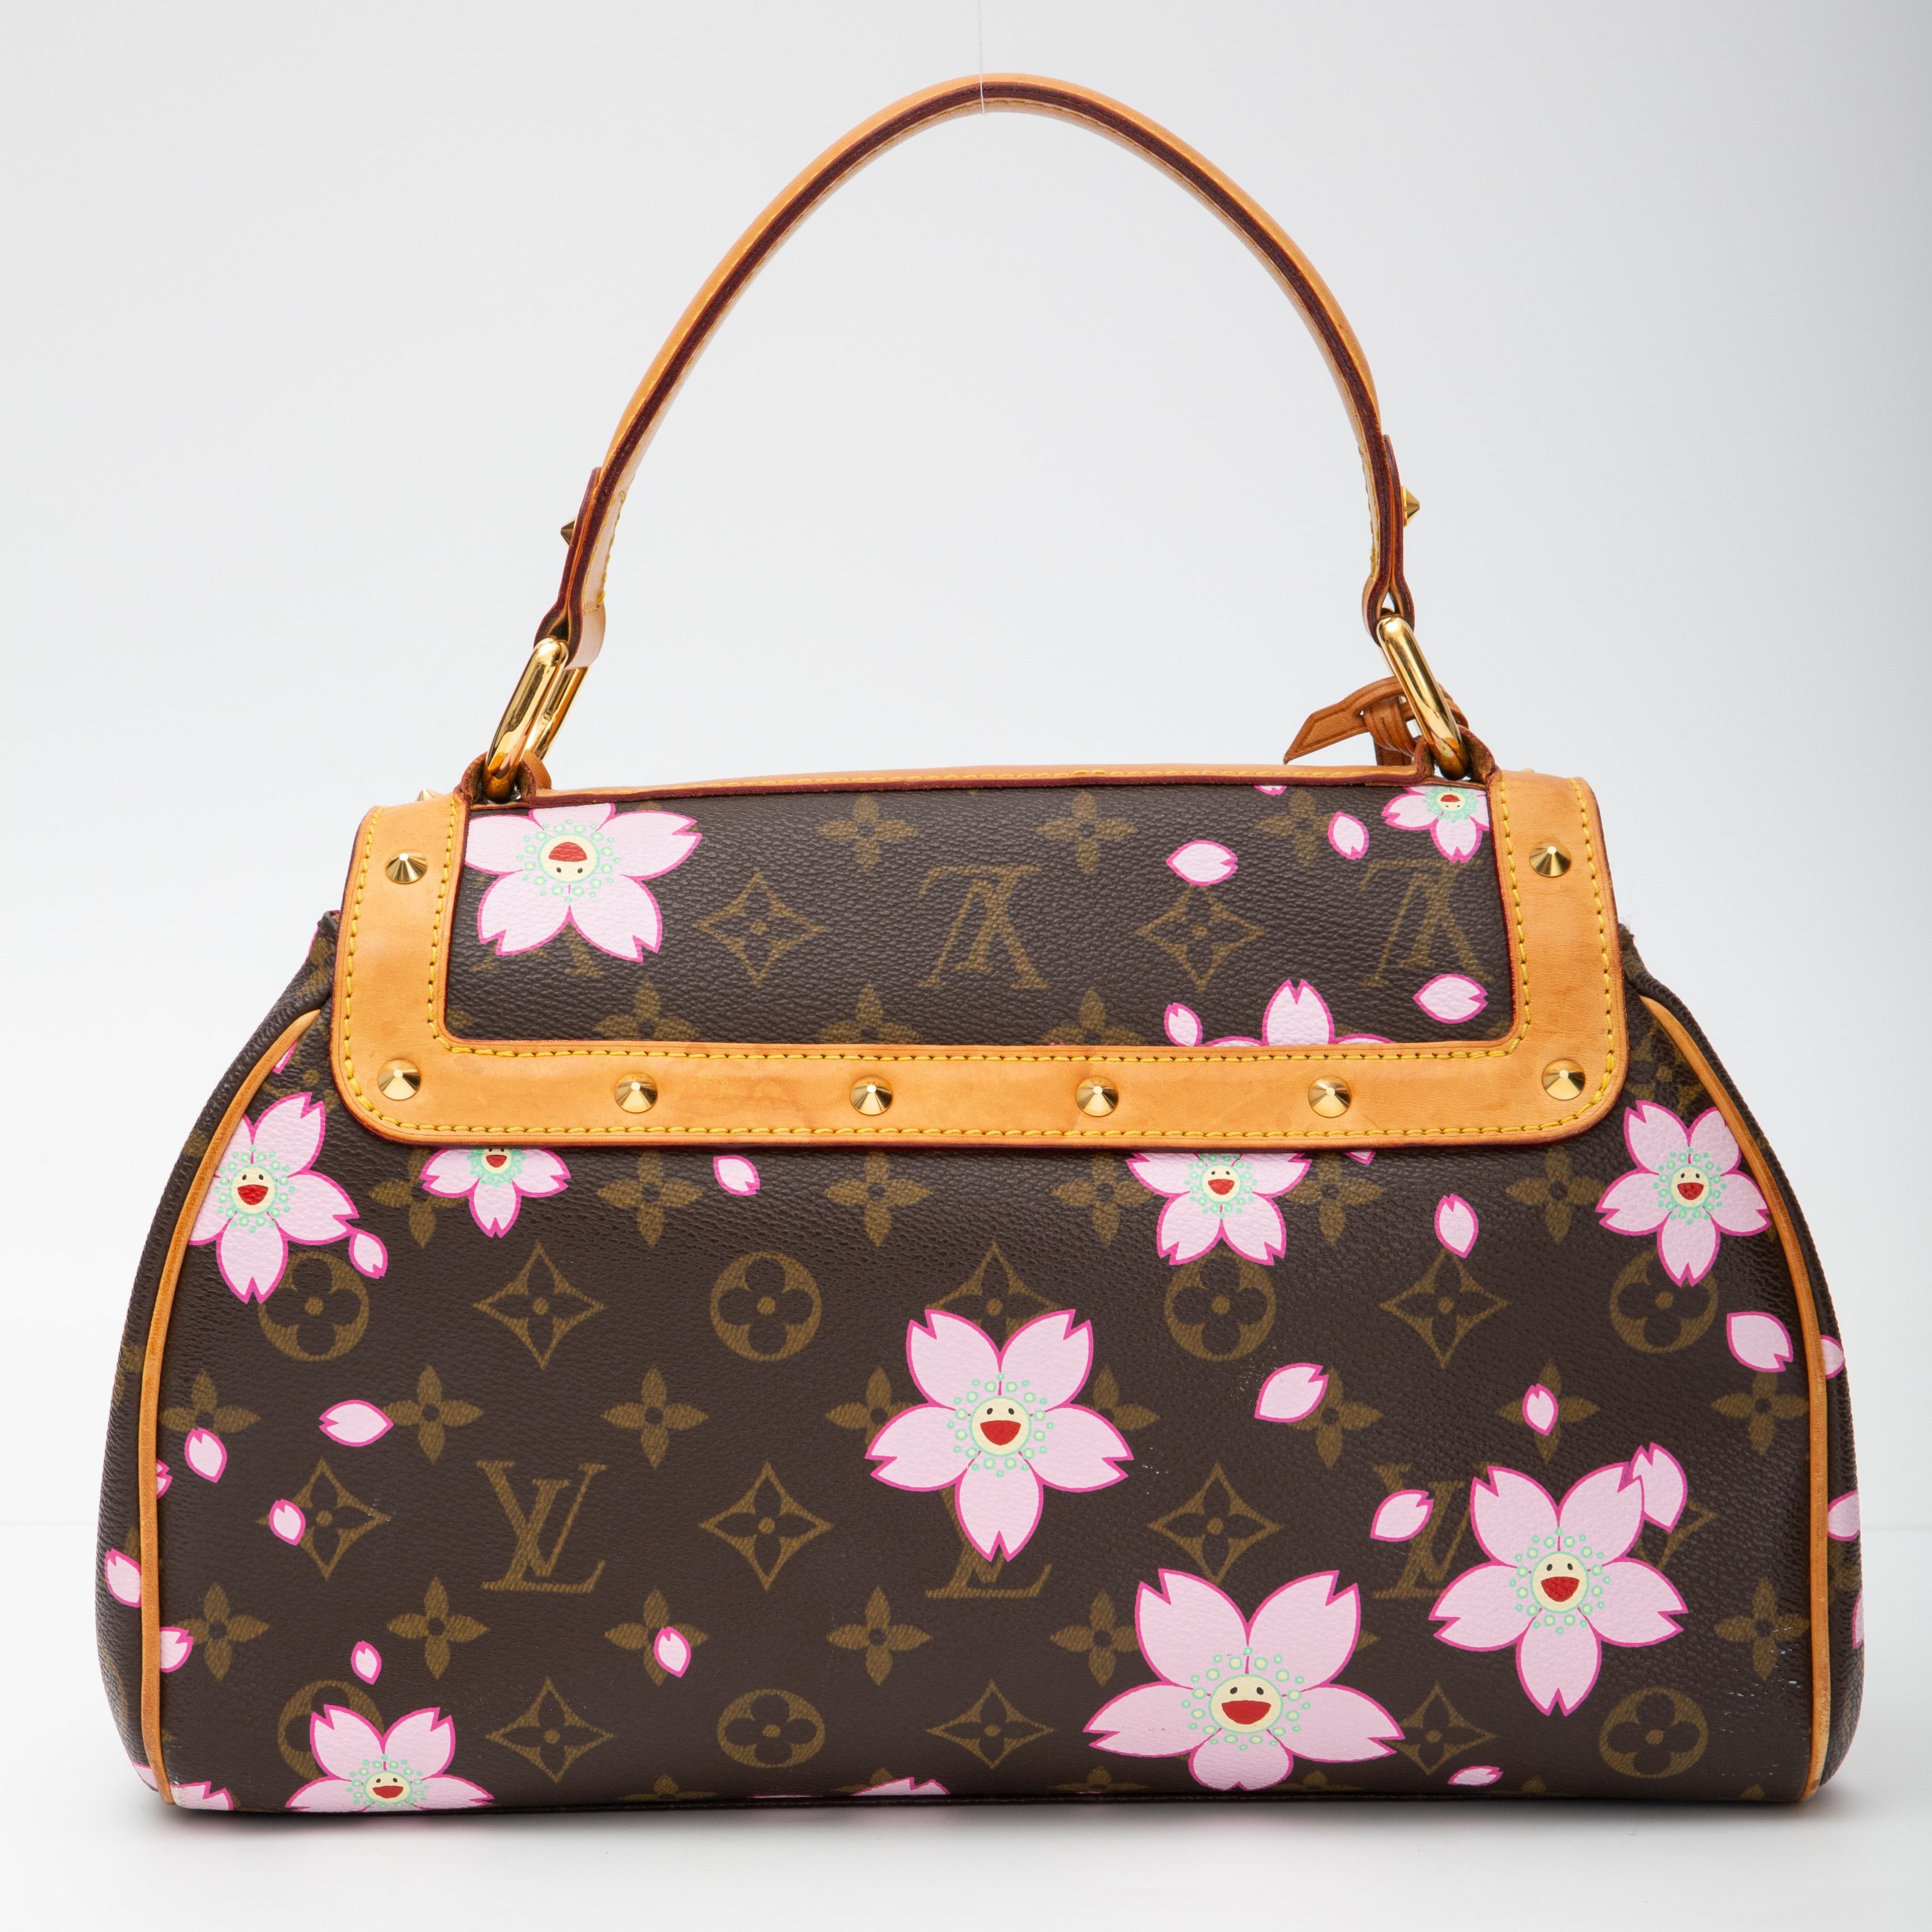 This handbag is made of classic Louis Vuitton monogram, printed with artwork by Takashi Murakami of smiling cherry blossom faces on coated canvas. This bag features pyramid cone studs, a vachetta leather top handle and a flap closure with a bow.